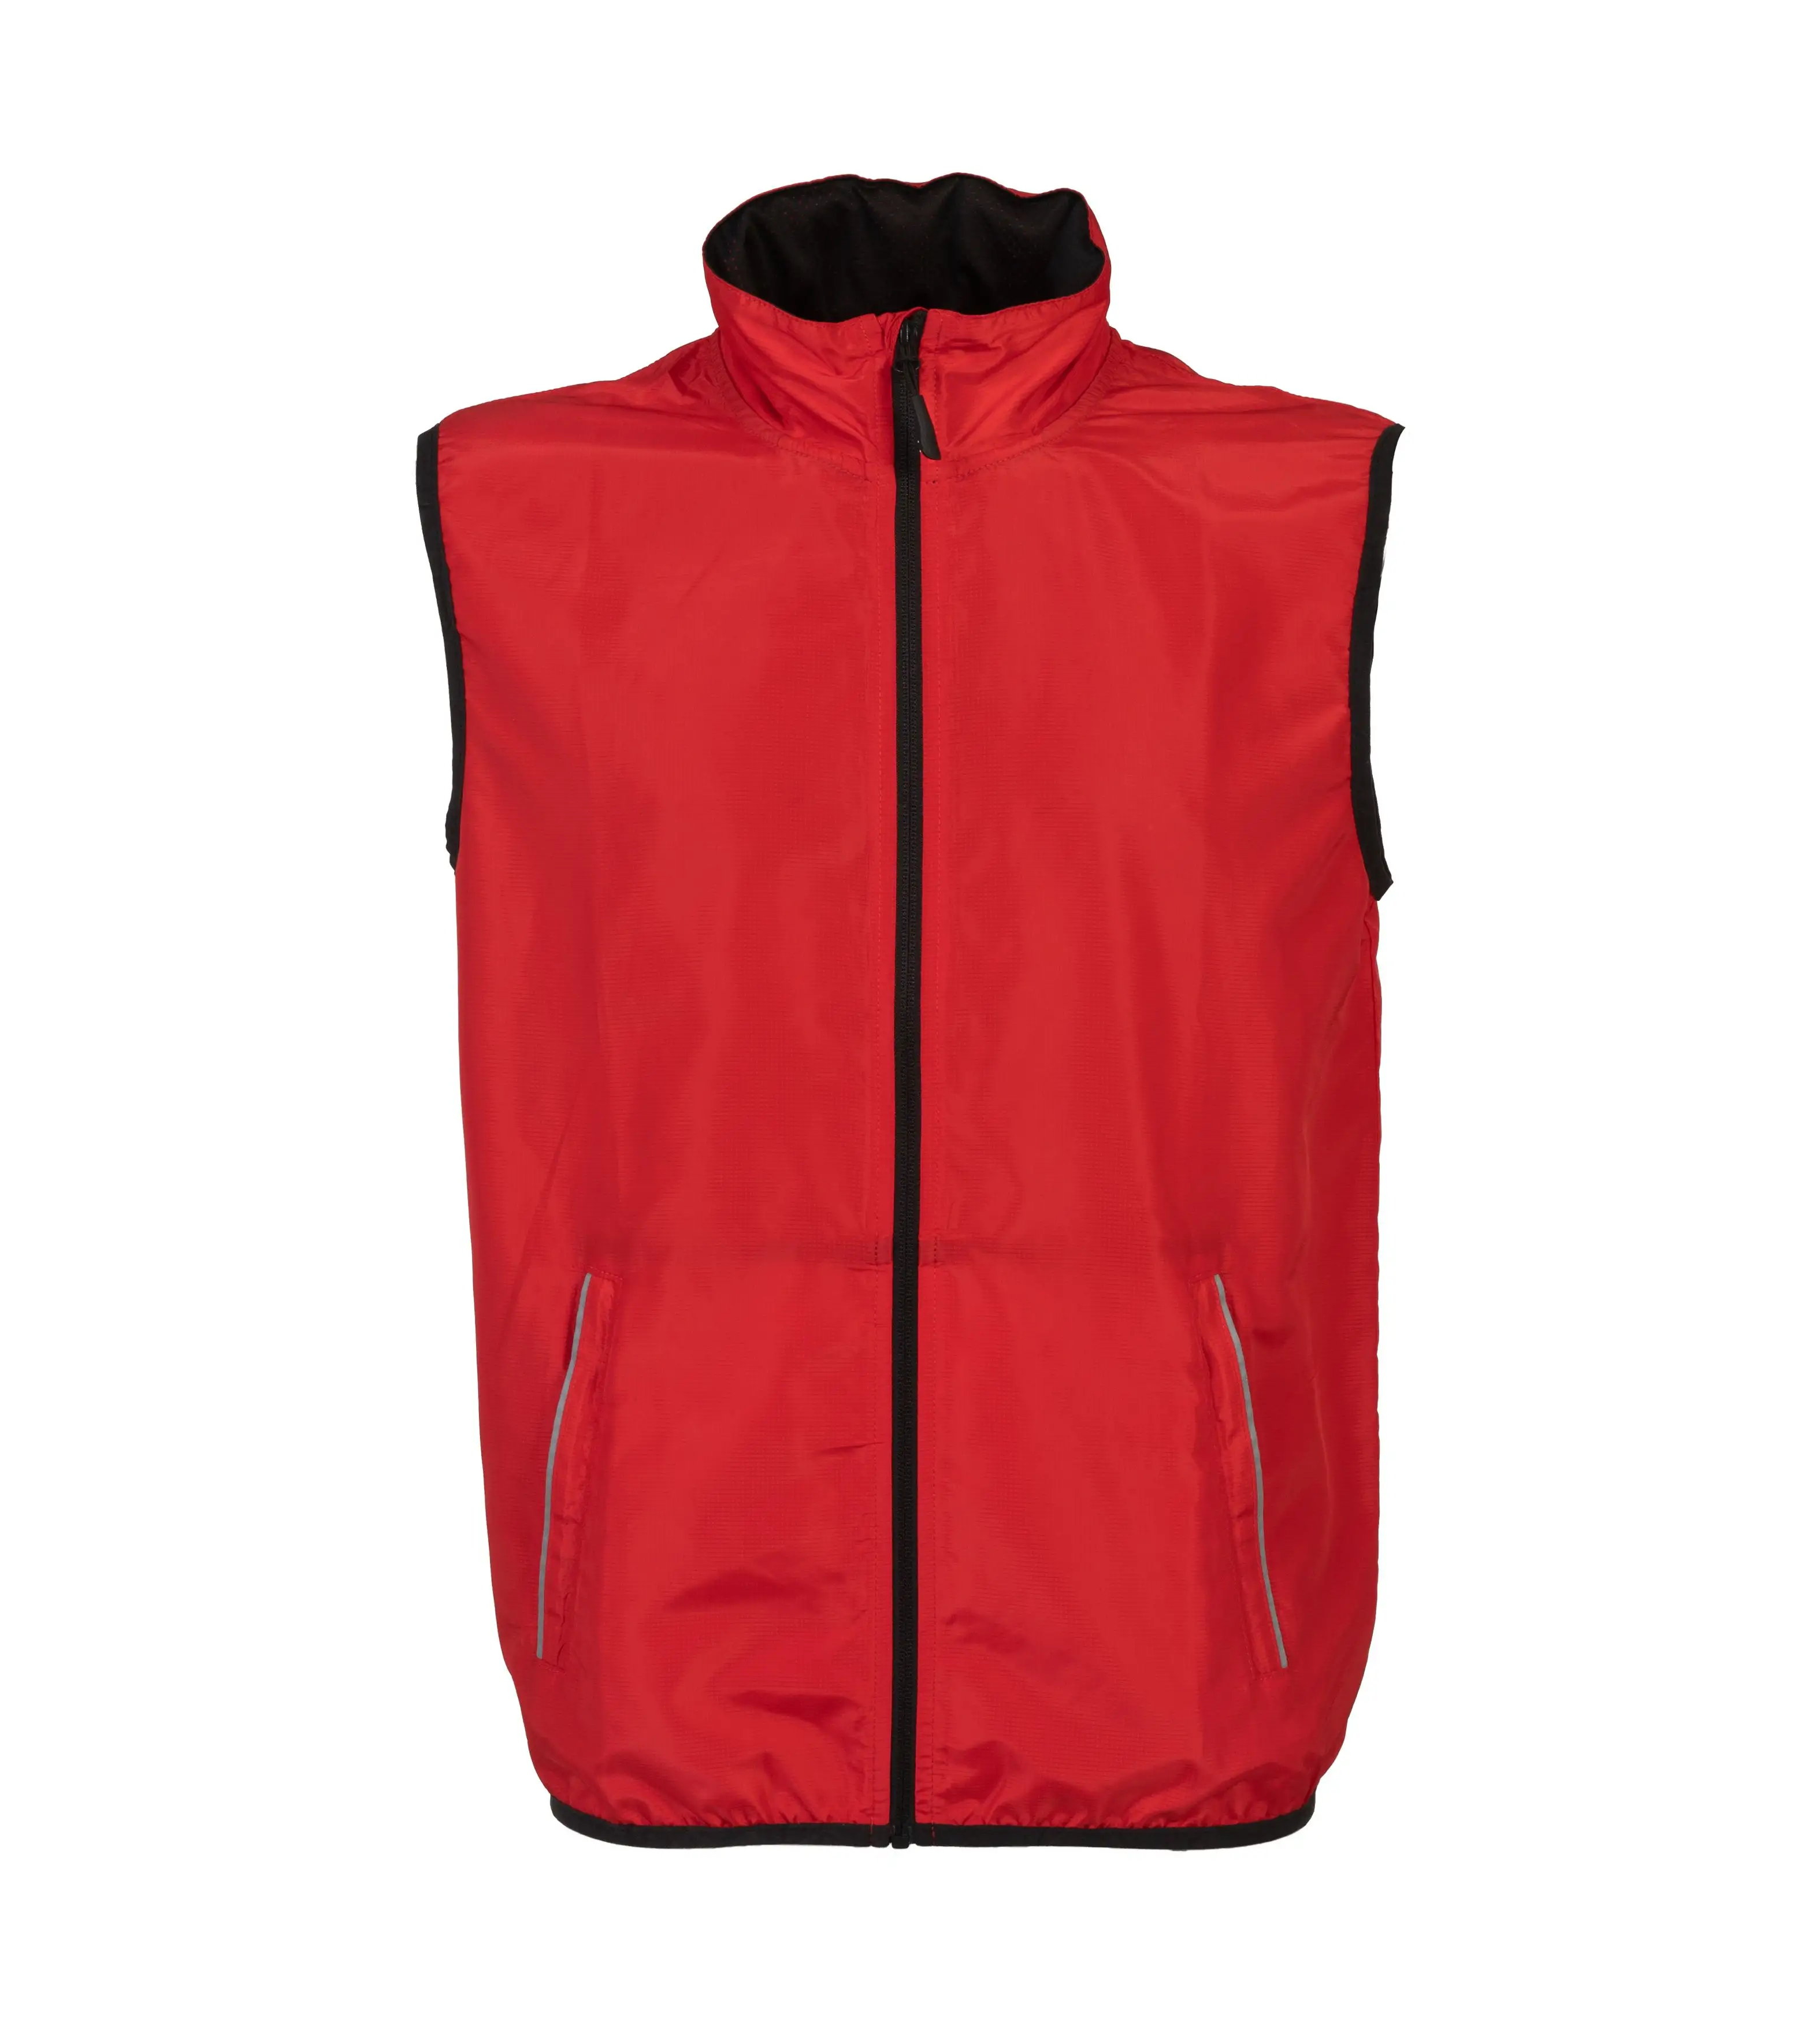 Gilet fiume man - yellow fluo - s